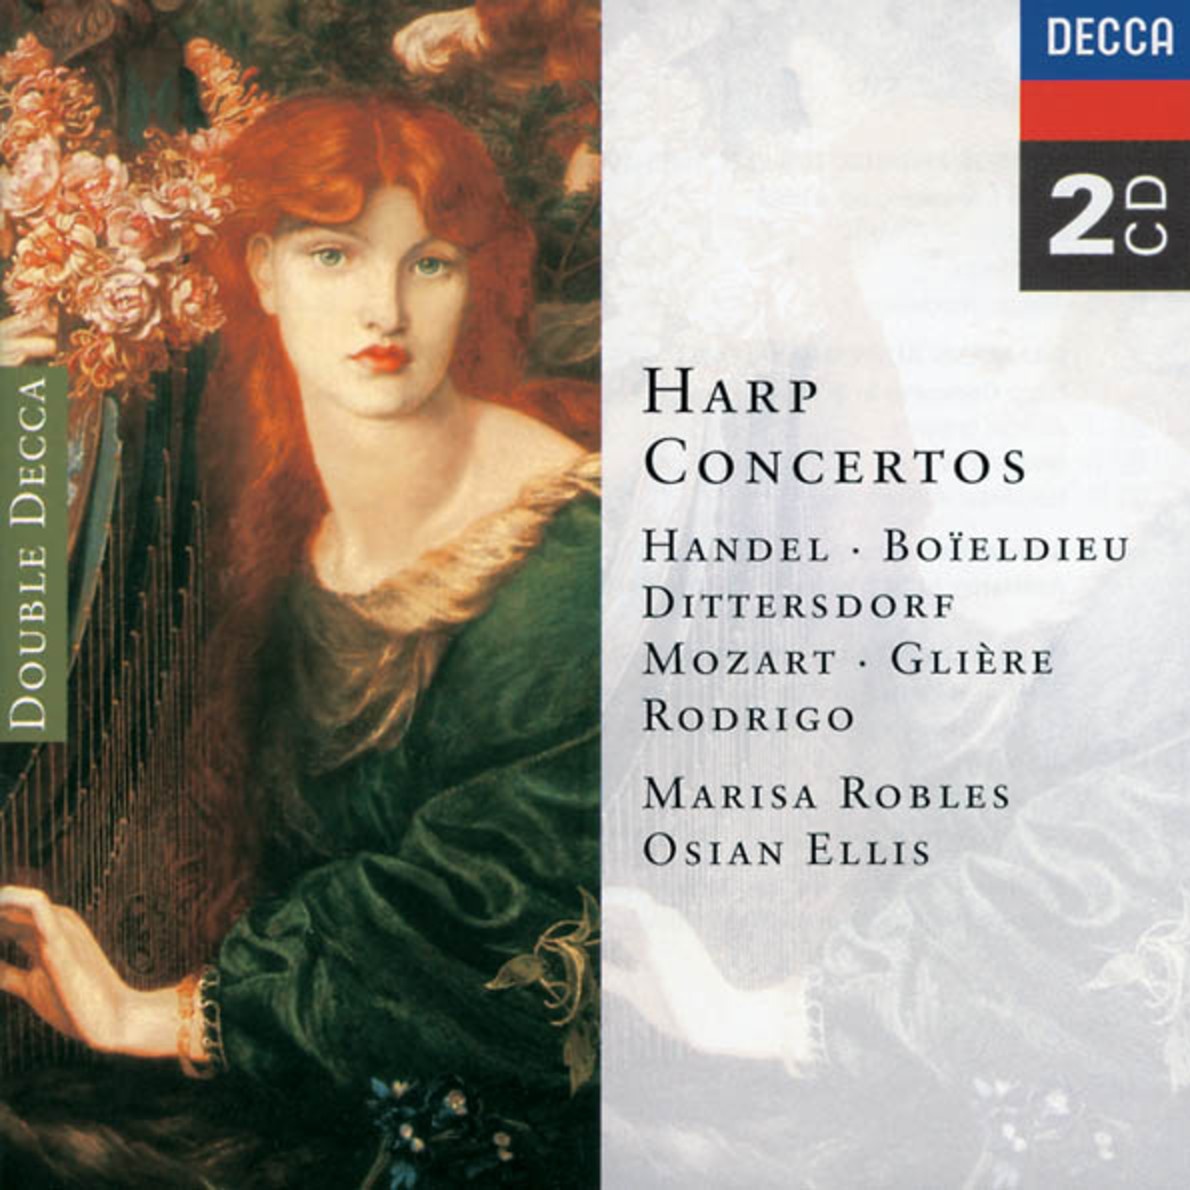 Concerto for Flute, Harp, and Orchestra in C, K.299:2. Andantino